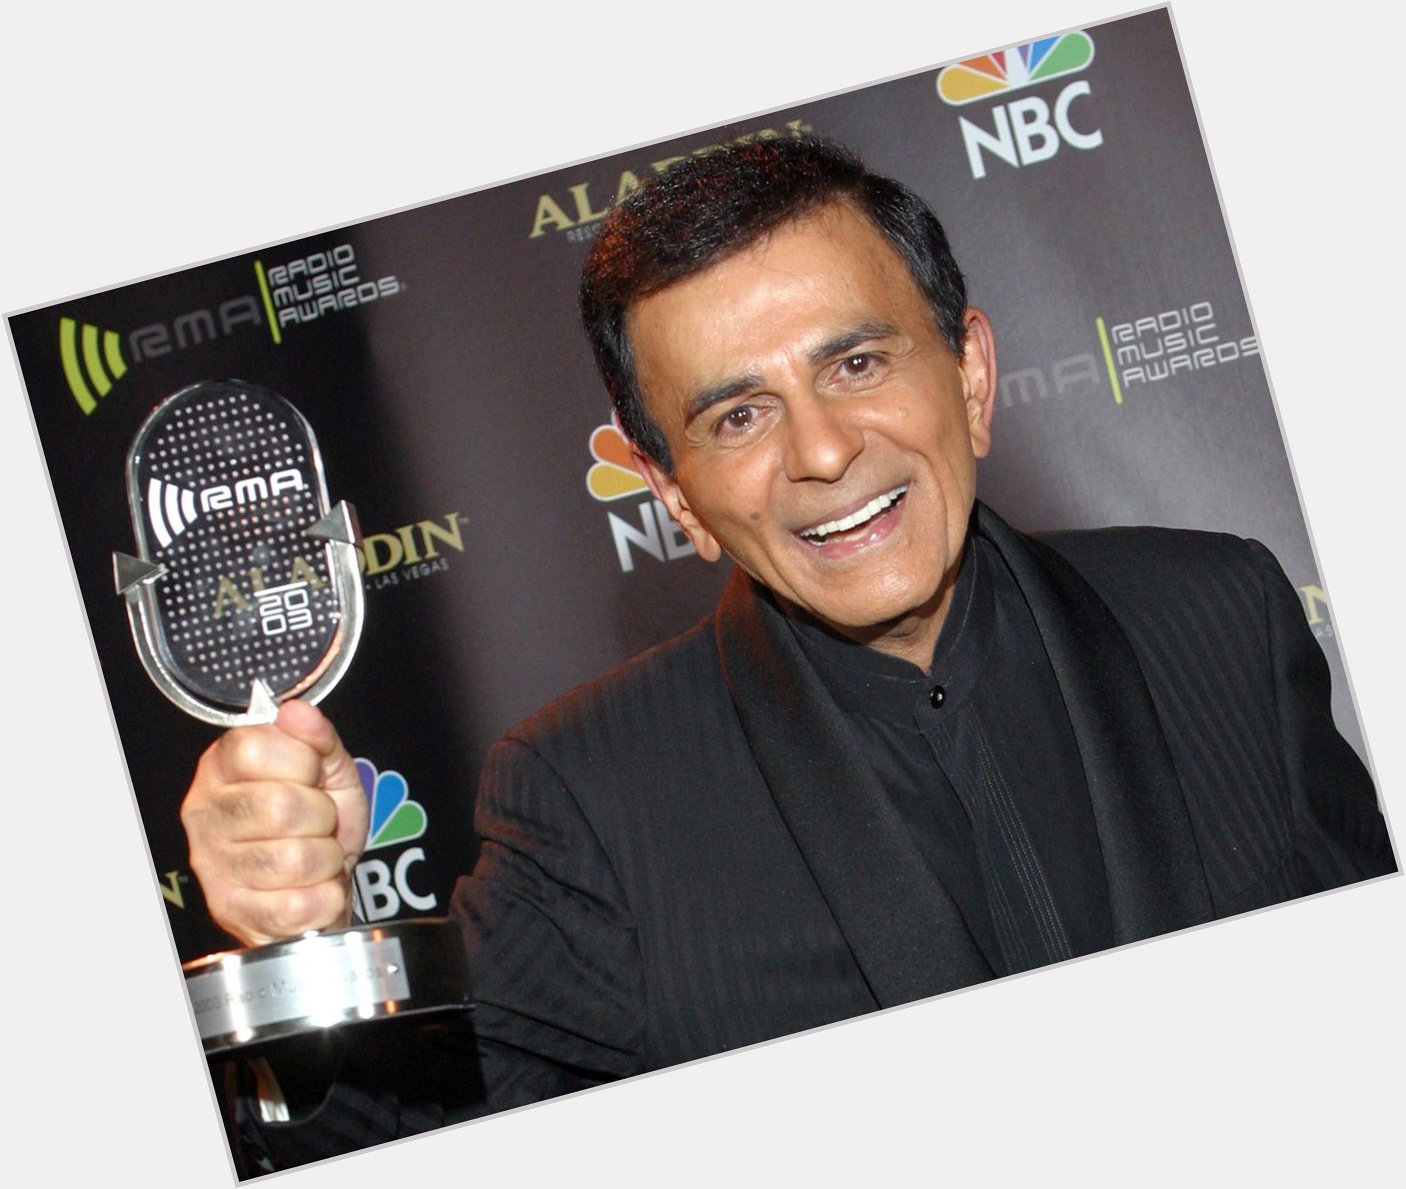 Happy Birthday to Casey Kasem, who would have turned 83 today! 